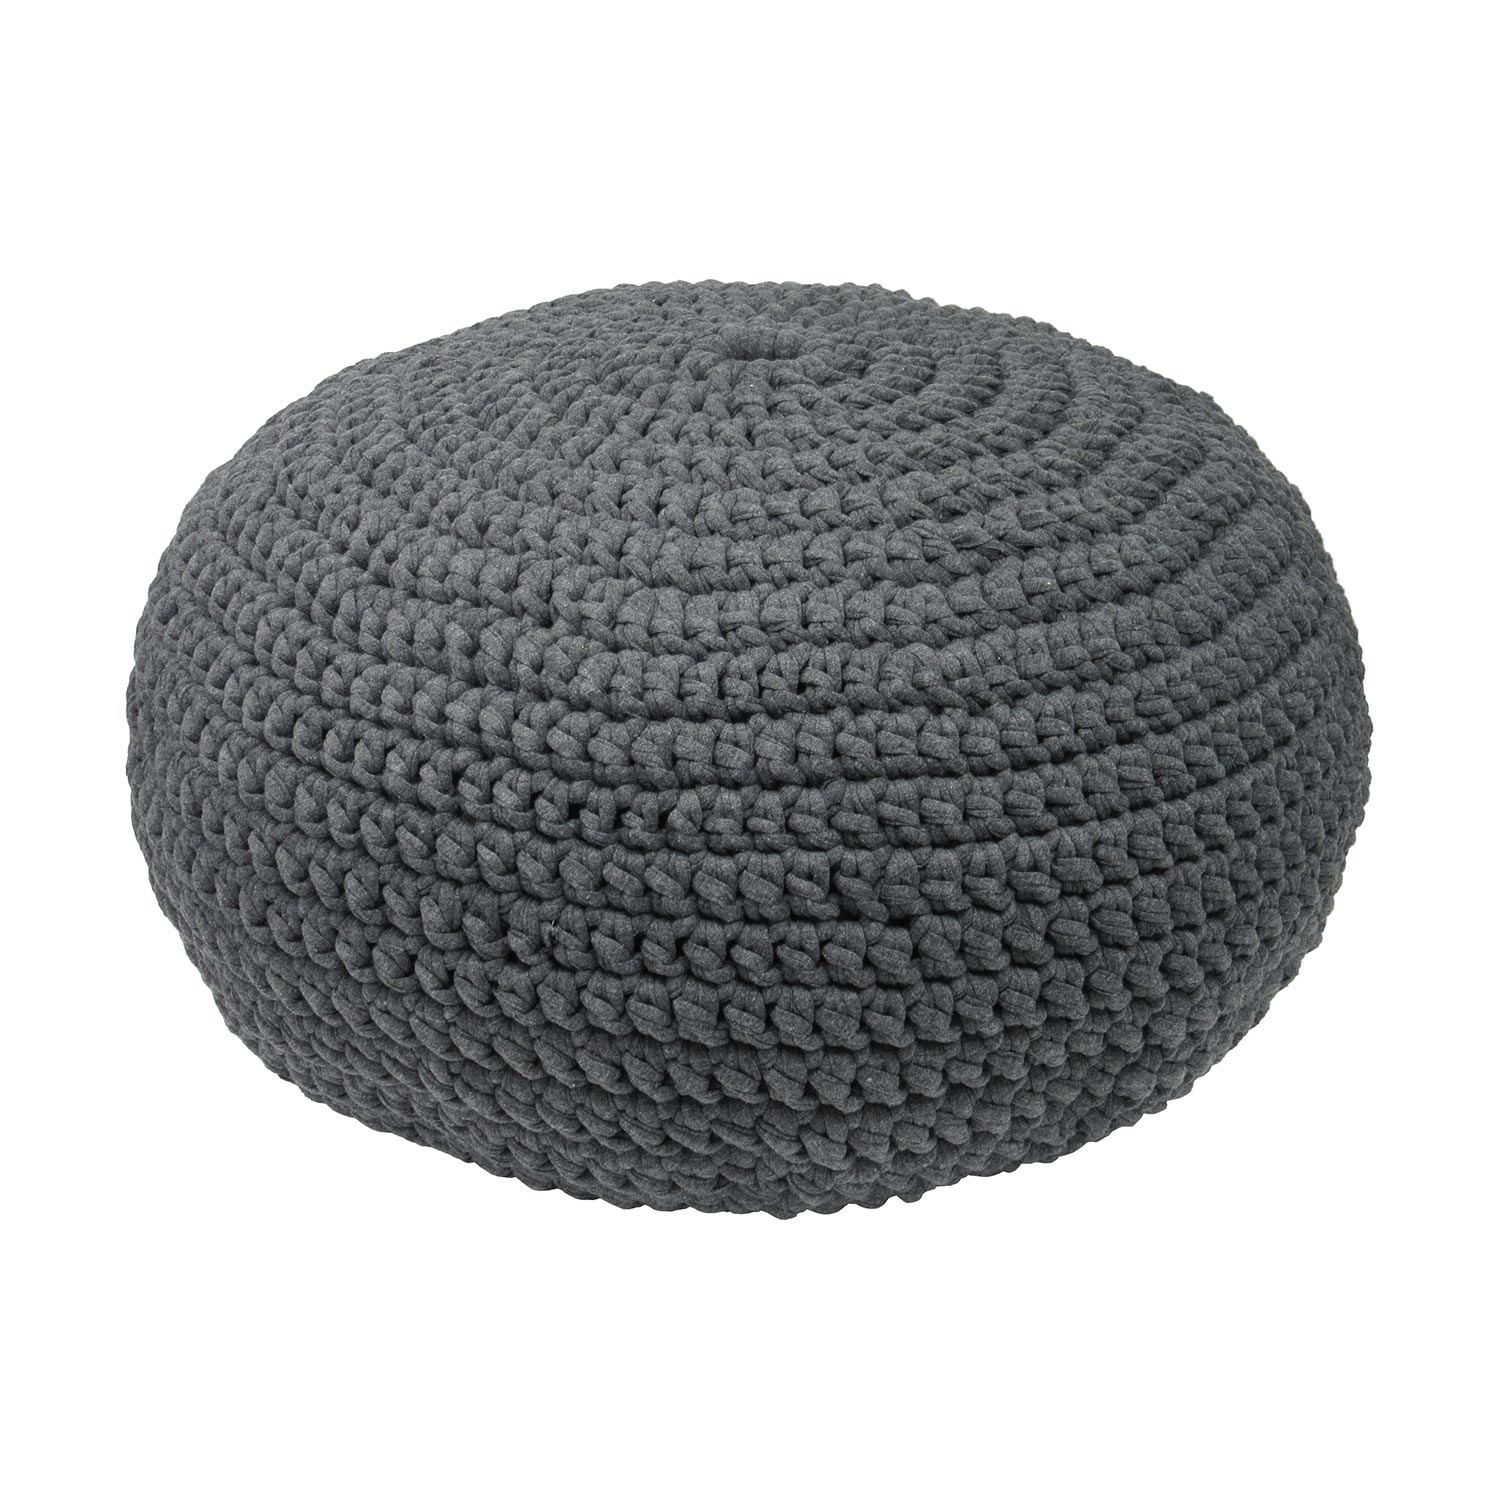 Made by Artisans Charcoal Cotton Crochet Floor Pebble Ottomans & Floor Pebbles Made by Artisans 